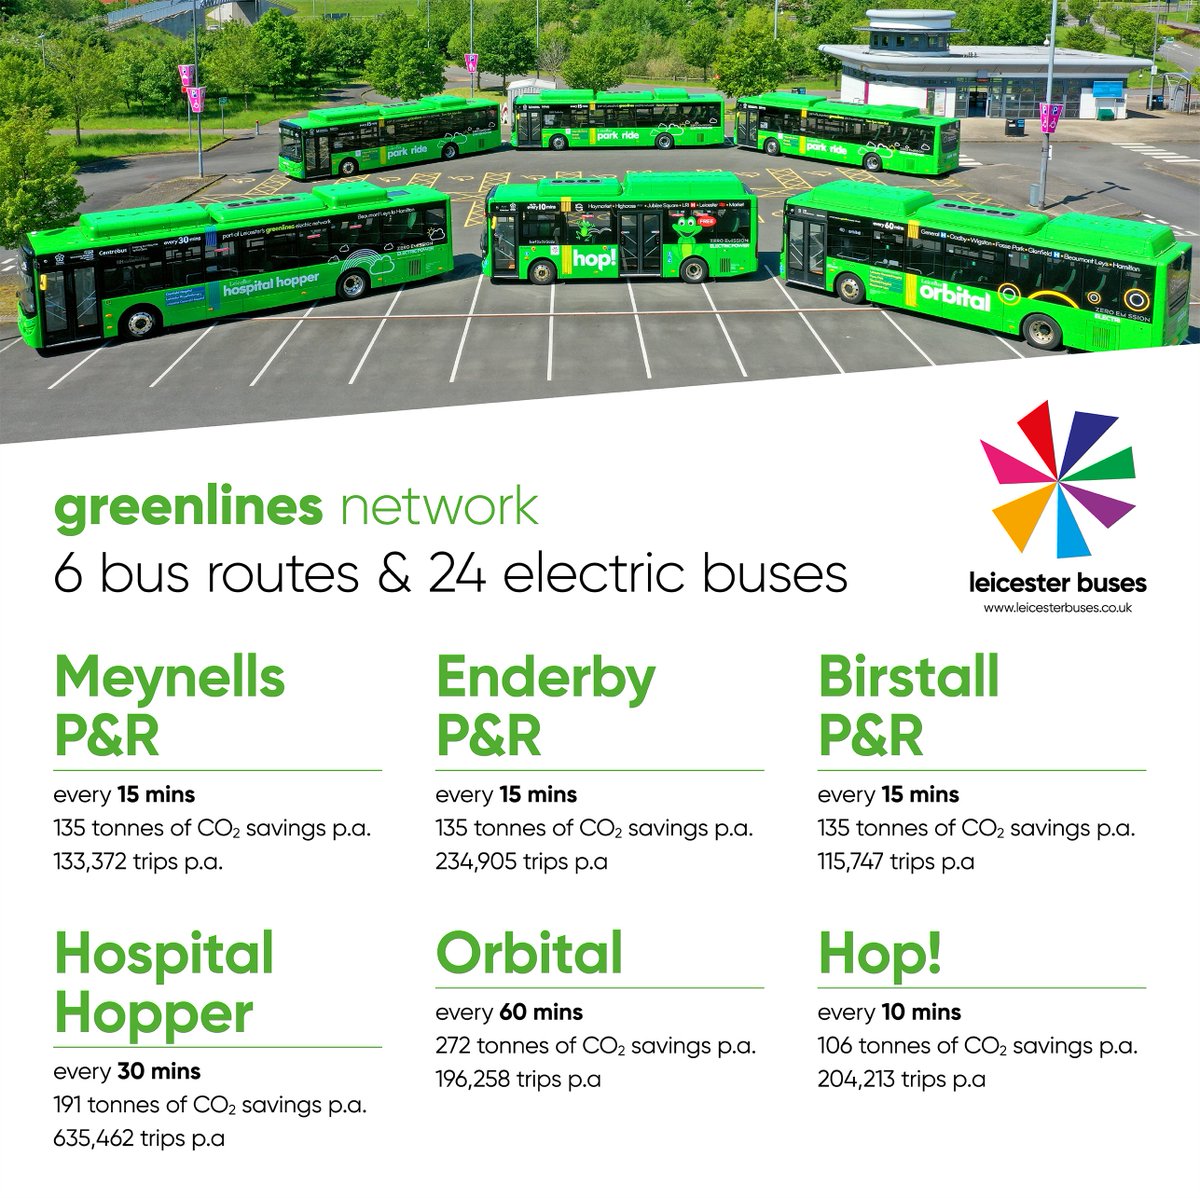 Find out more about our fully electric Greenlines network leicesterbuses.co.uk/greenlines #leicesterbuses #greenlines #electric #zeroemissions